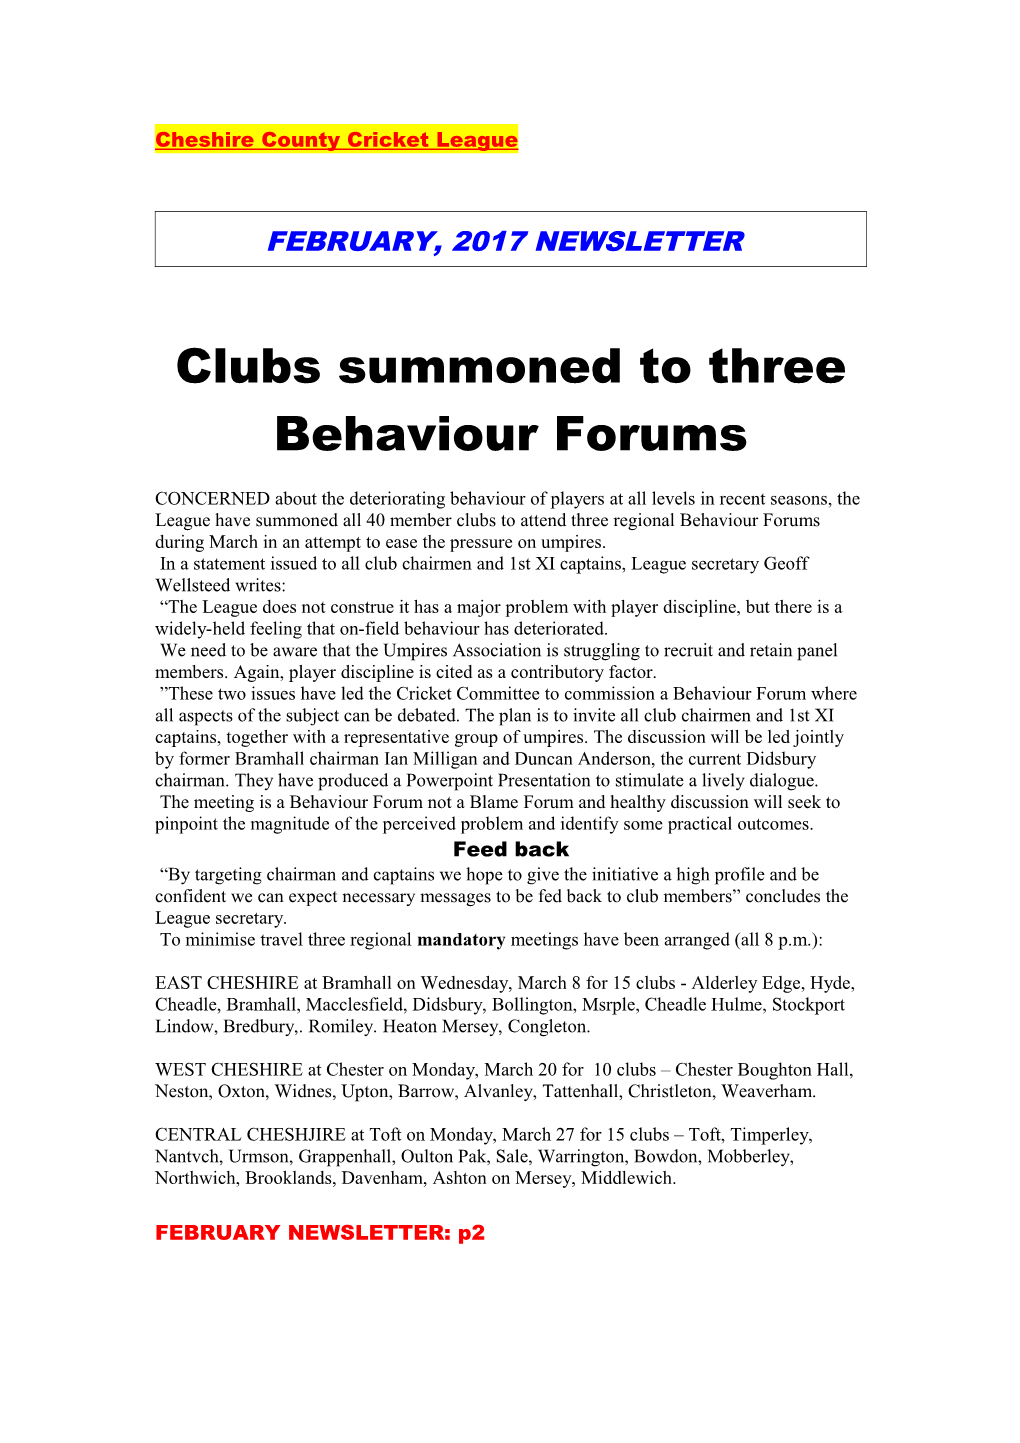 Clubs Summoned to Three Behaviour Forums